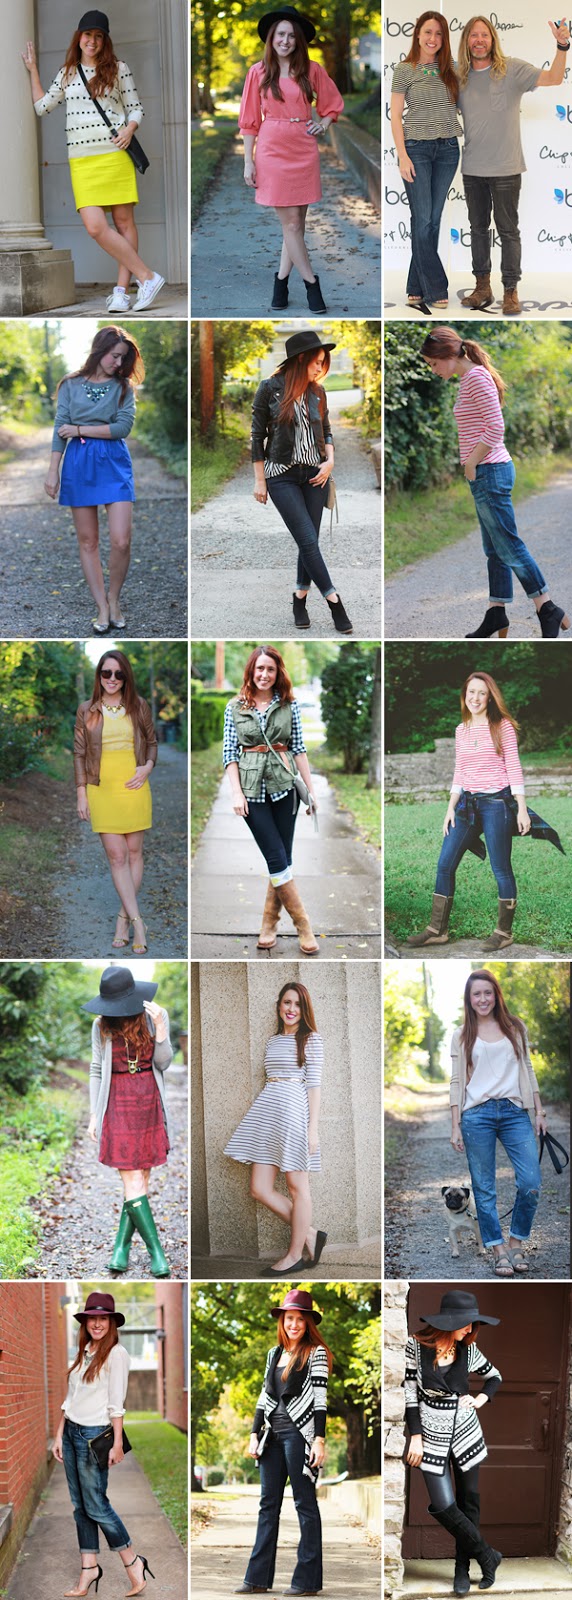 Here & Now | A Denver Style Blog: an October of outfits